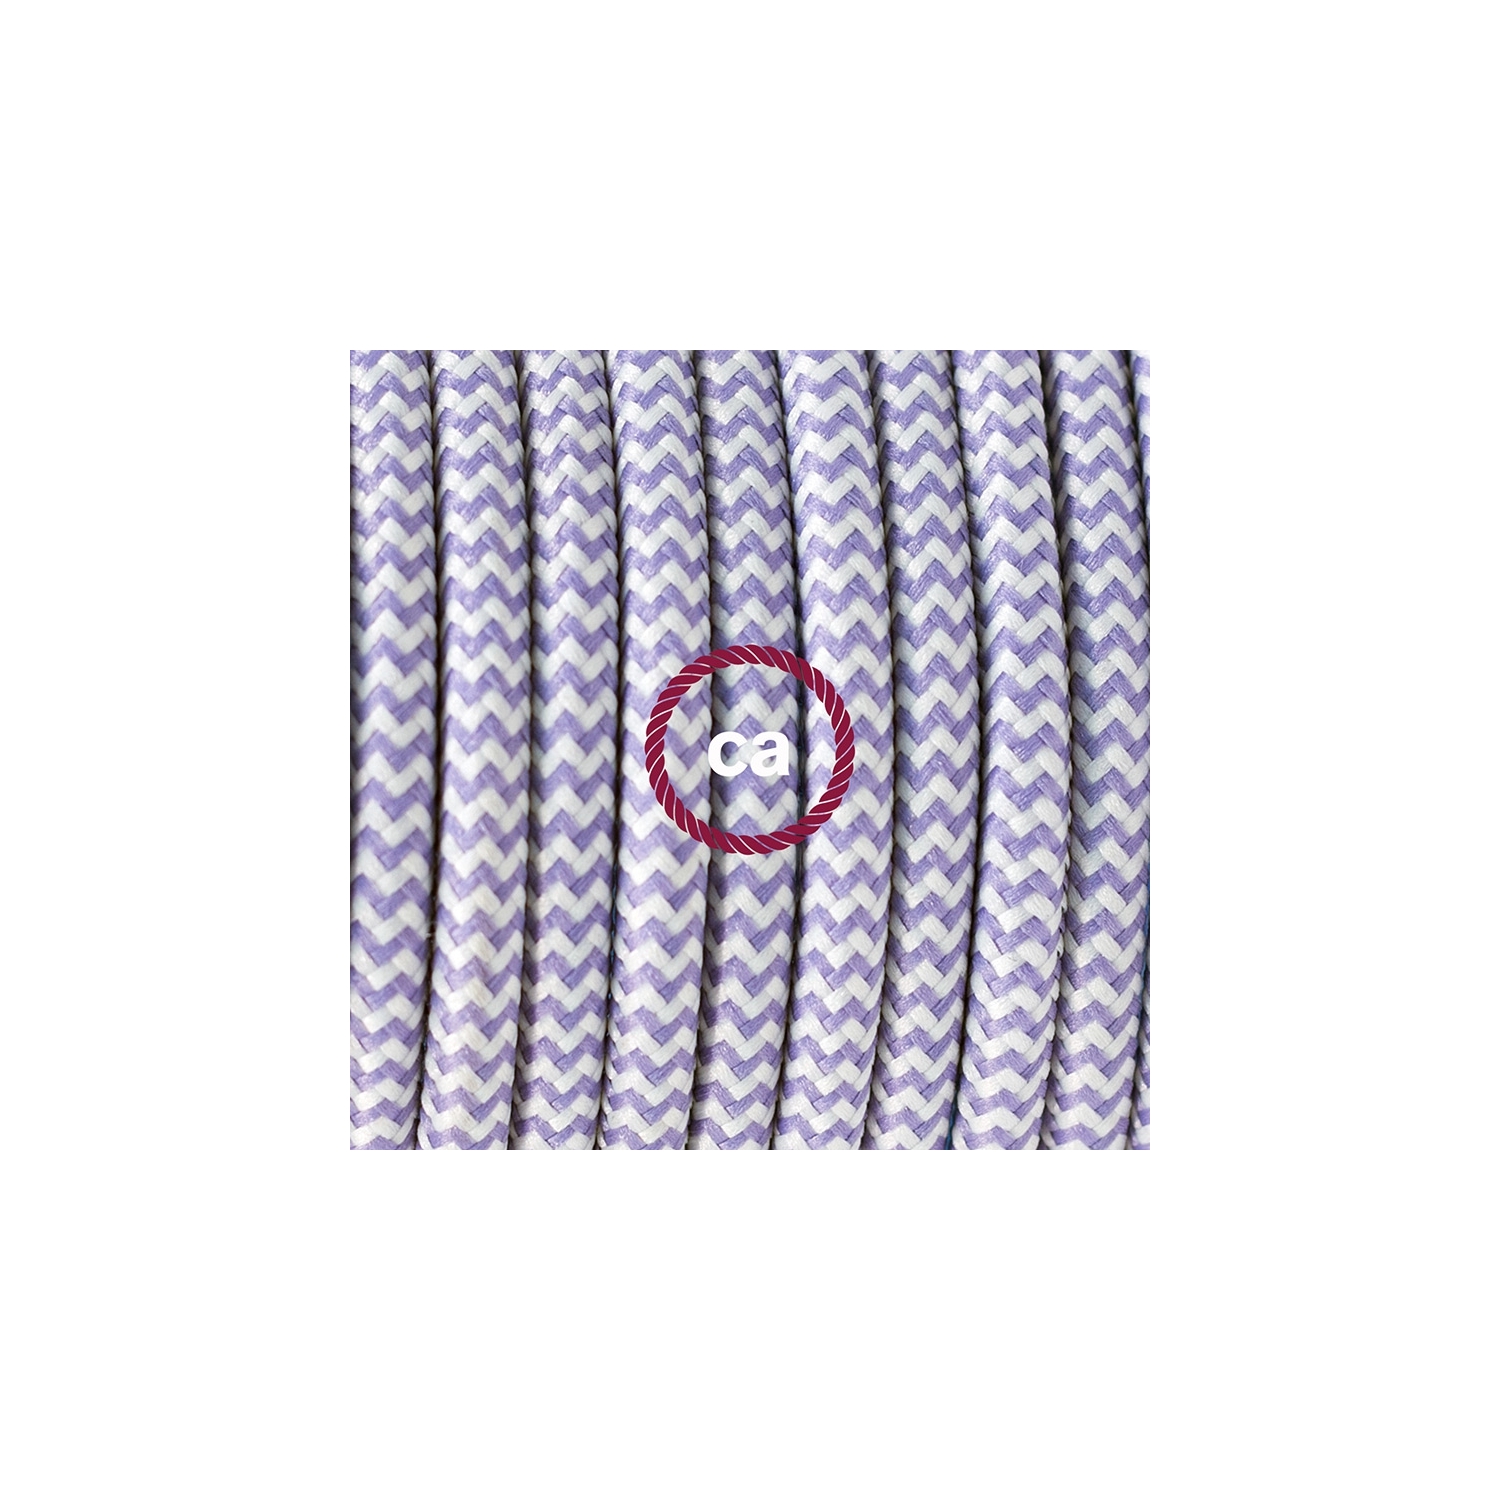 Plug-in Pendant with switch on socket | RZ07 Lilac & White Chevron